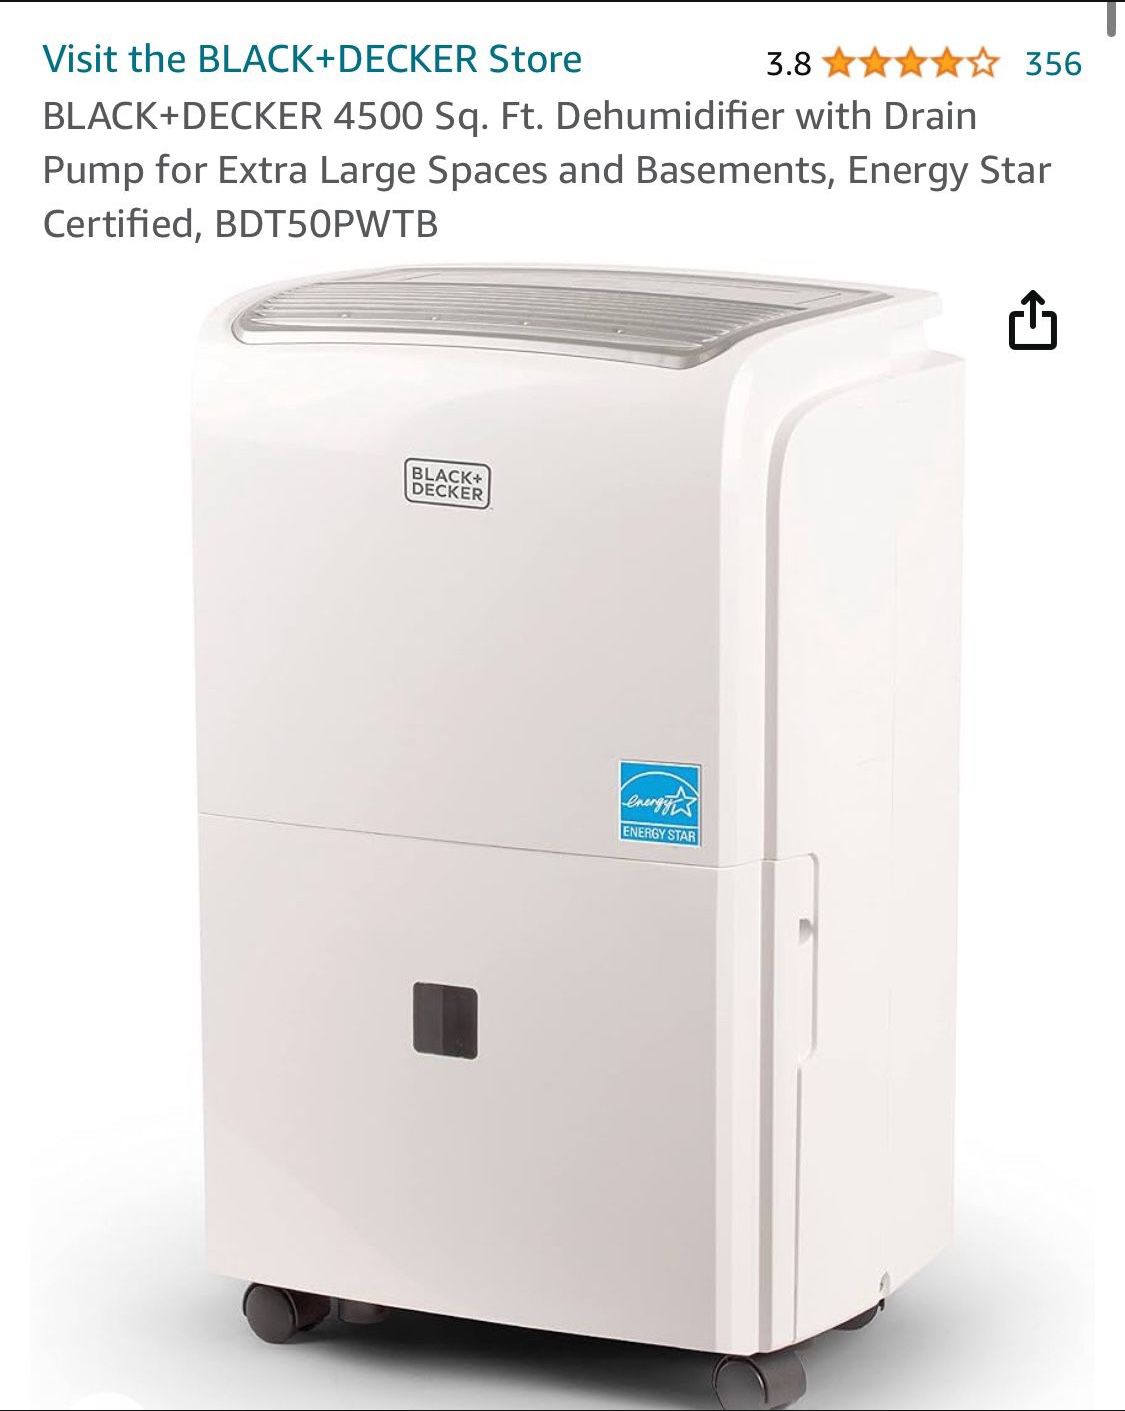 BLACK+DECKER 4500 Sq. Ft. Dehumidifier With Drain Pump For Extra Large Spaces And Basements, Energy Star Certified, BDT50PWTB 4500 + Sq. Ft